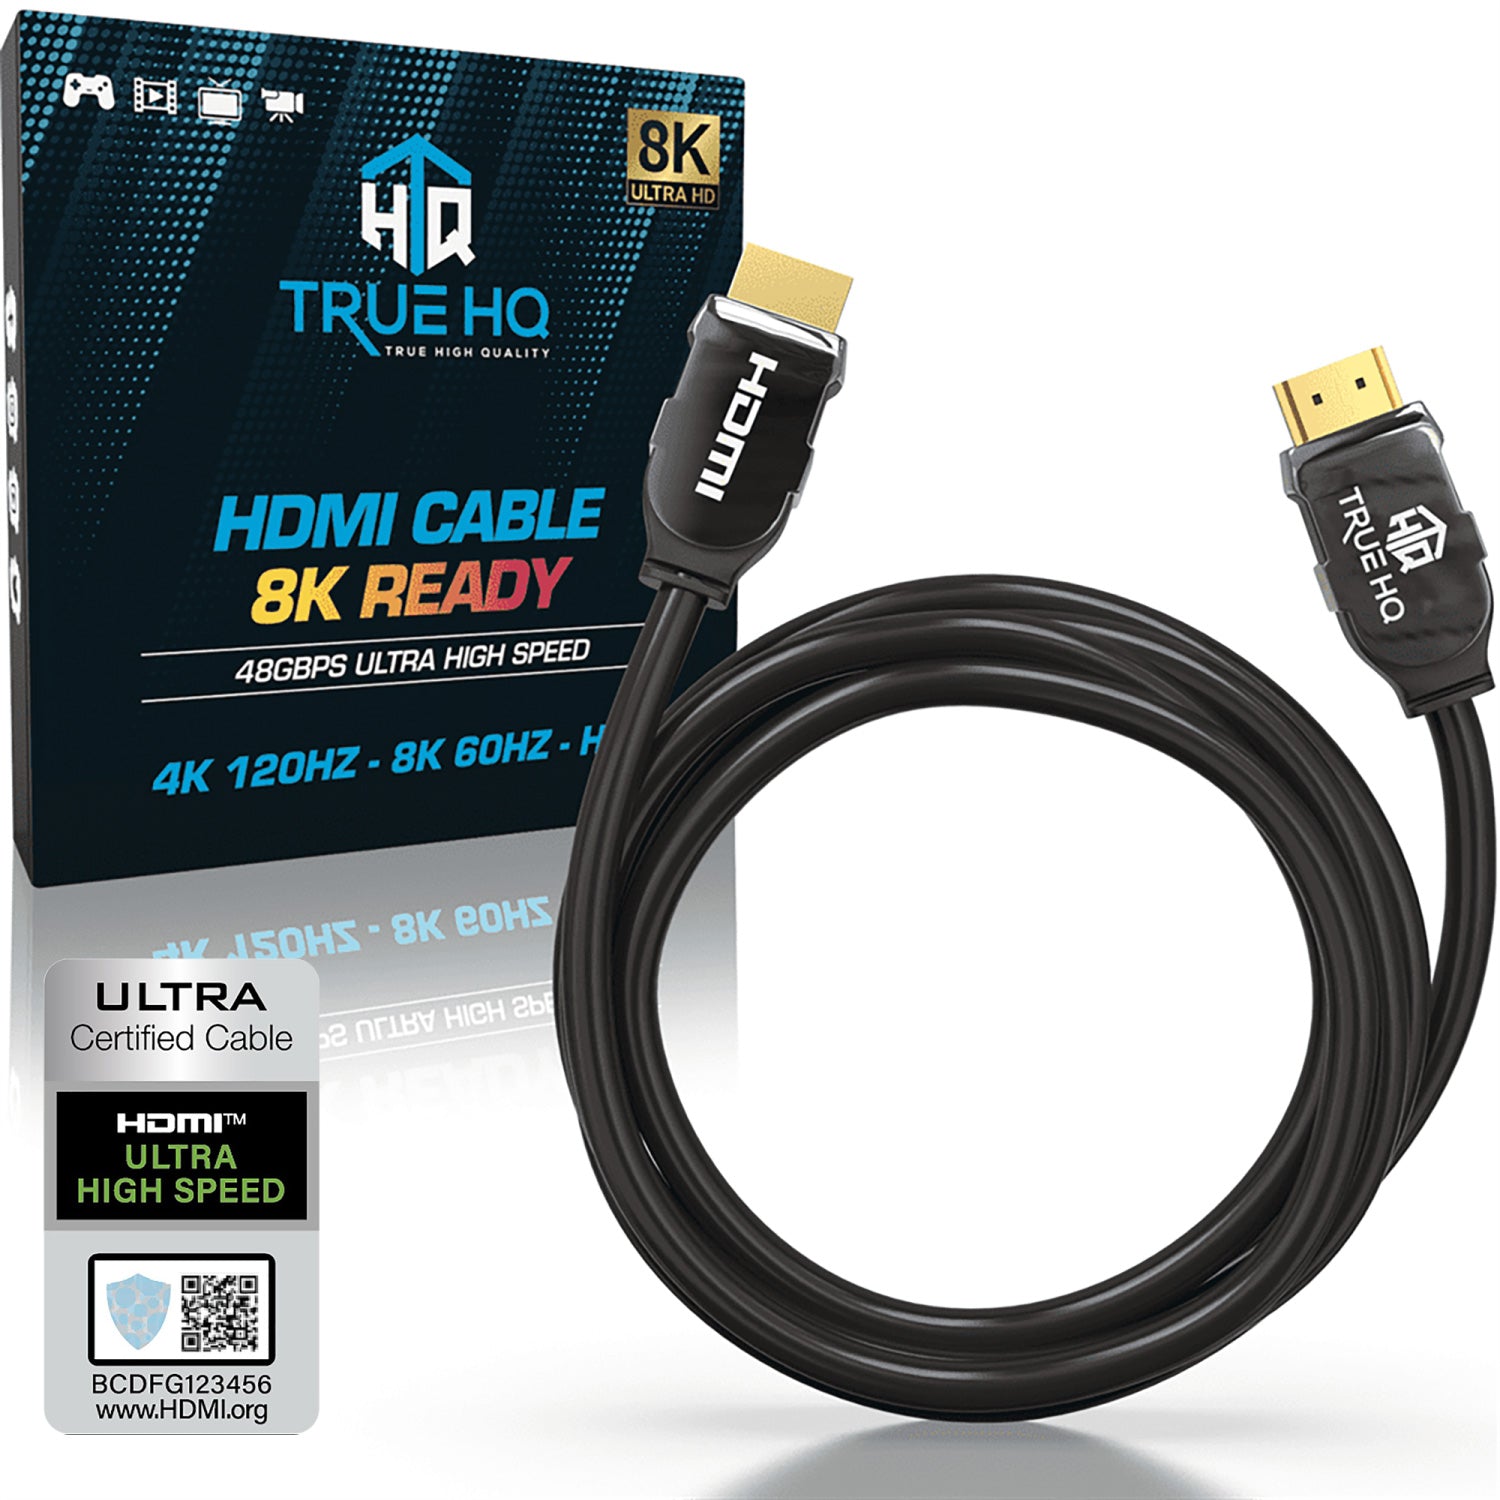 REAL CABLE INFINITE HDMI Longueur 3m